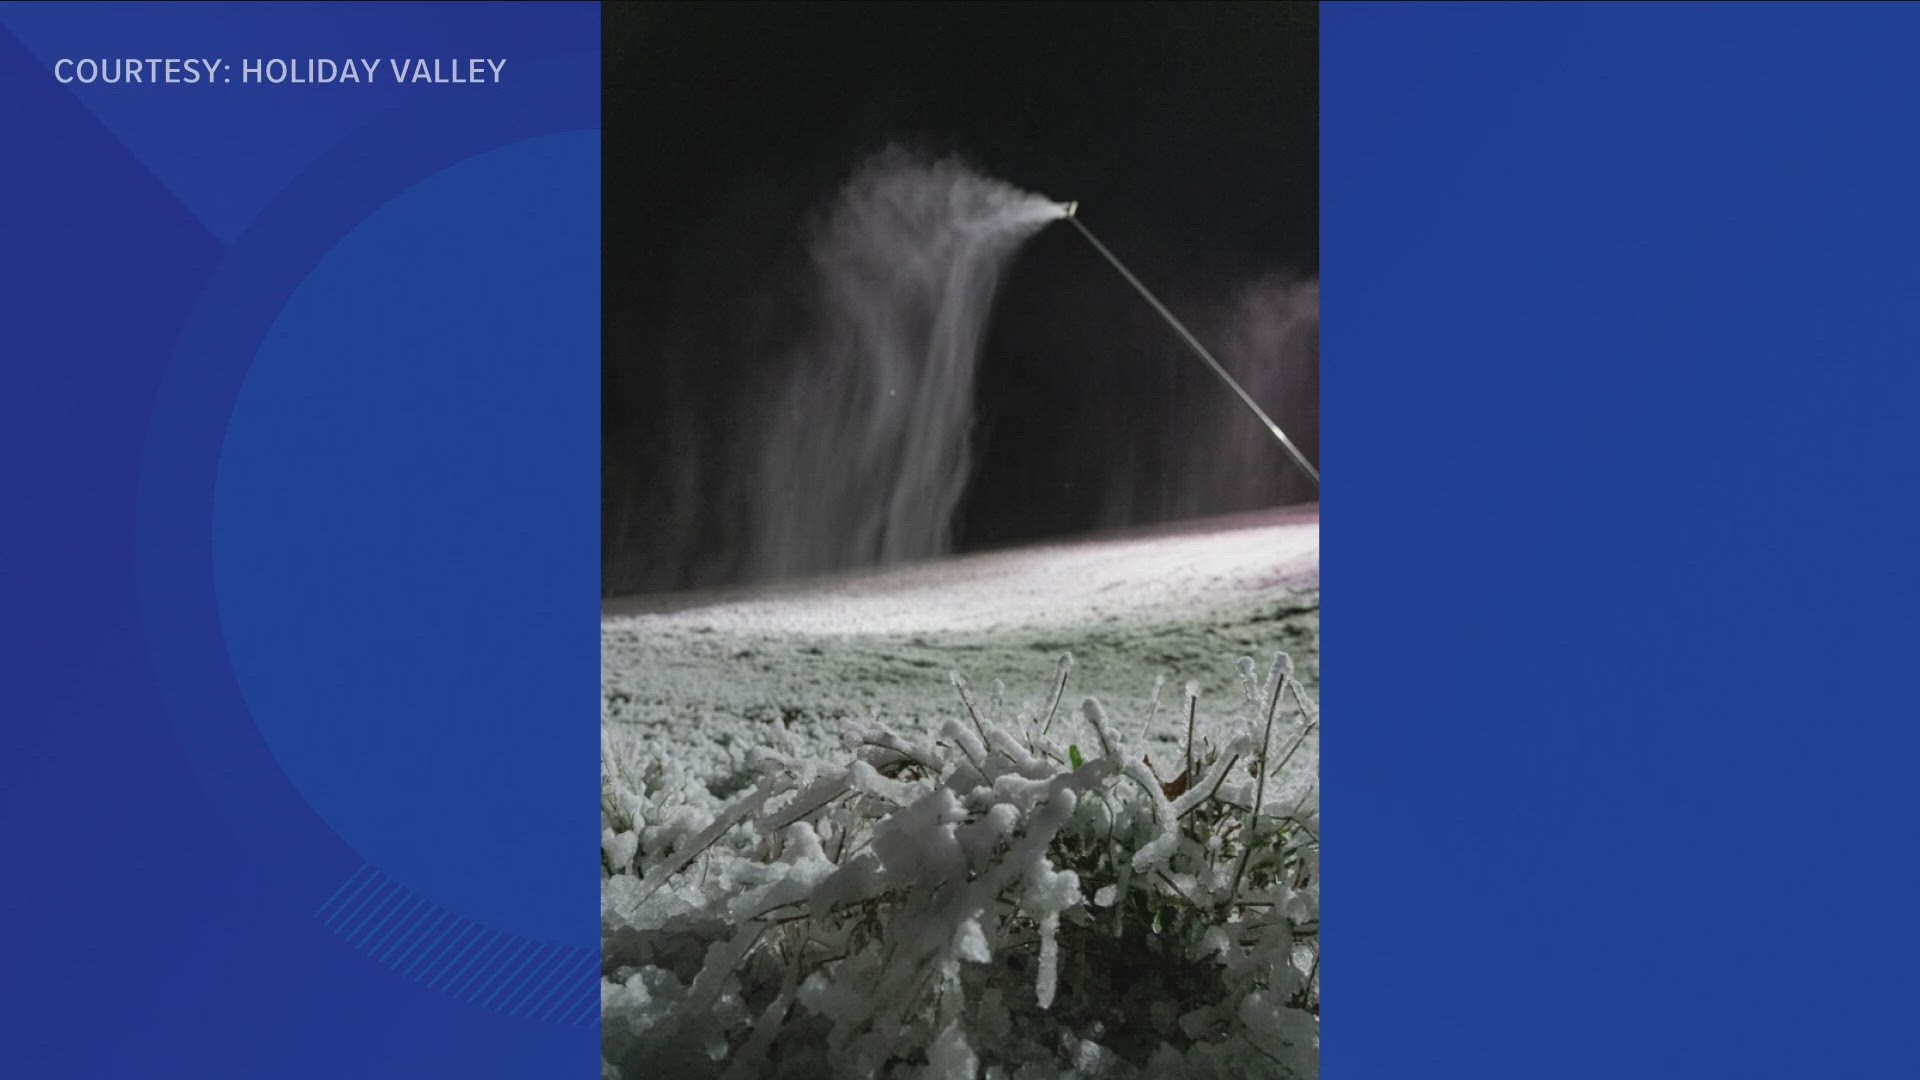 Holiday Valley's snow making team is hard at work.